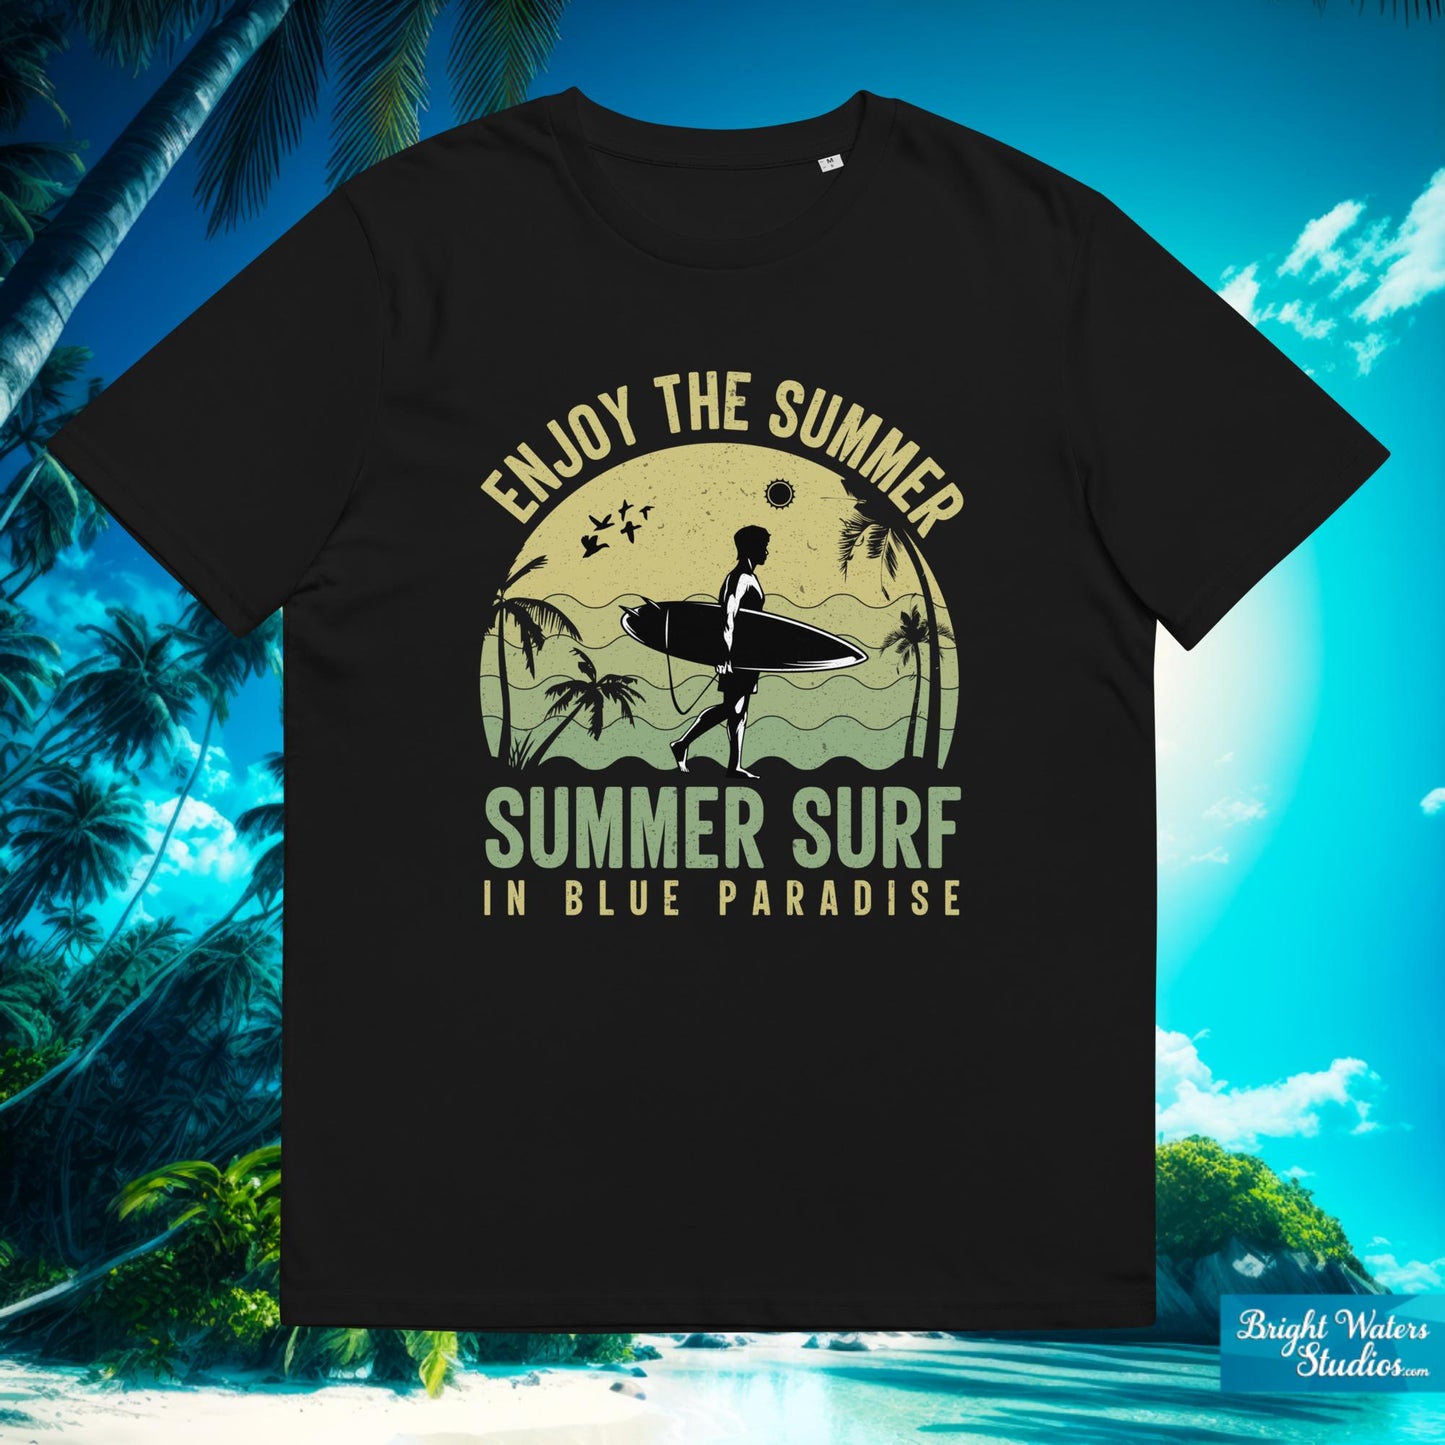 Summer Surf in Paradise T-Shirt